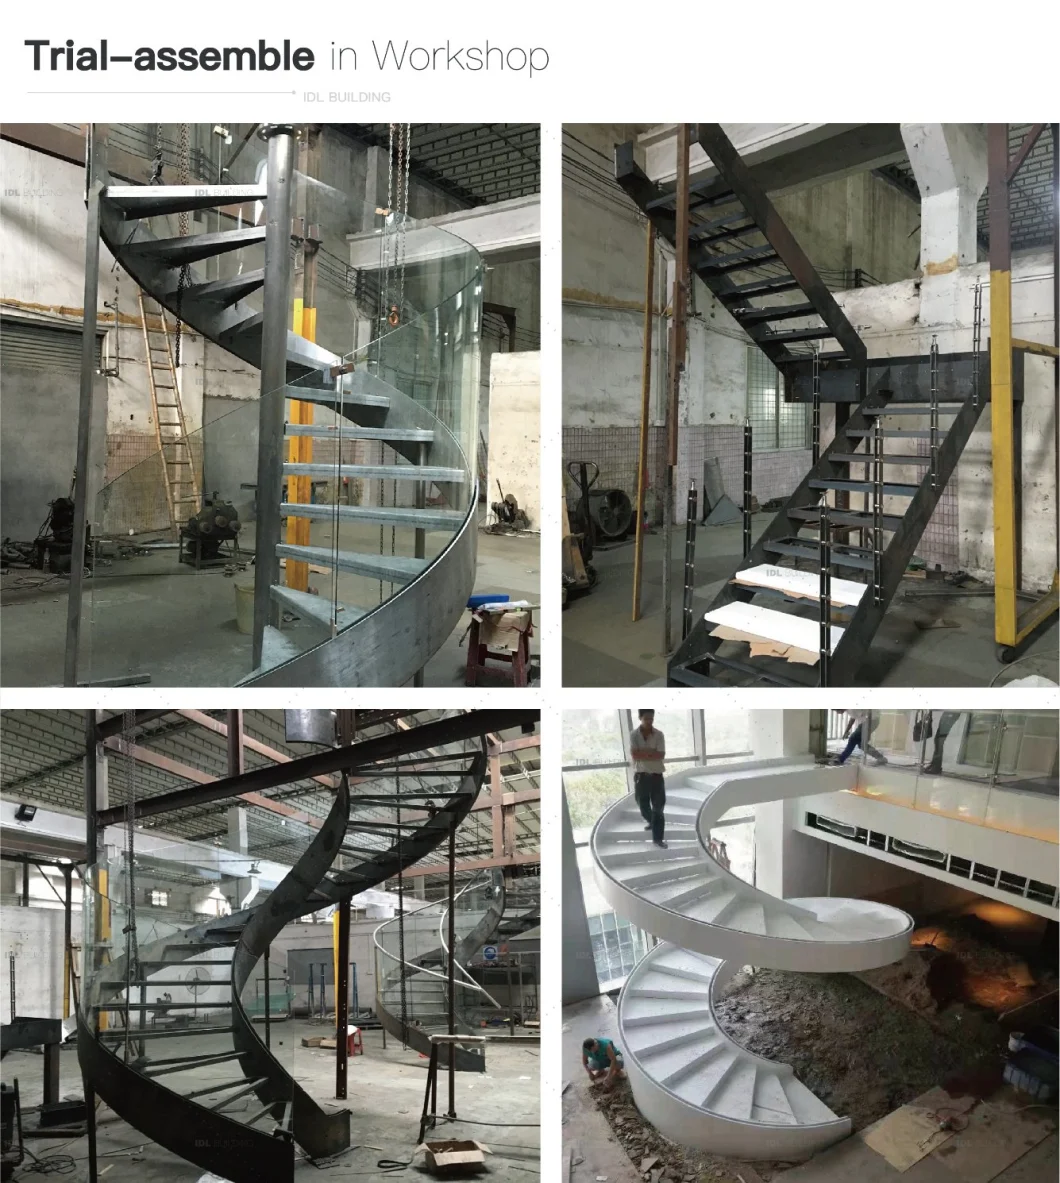 Indoor Stainless Steel Handrail Glass Spiral Staircase